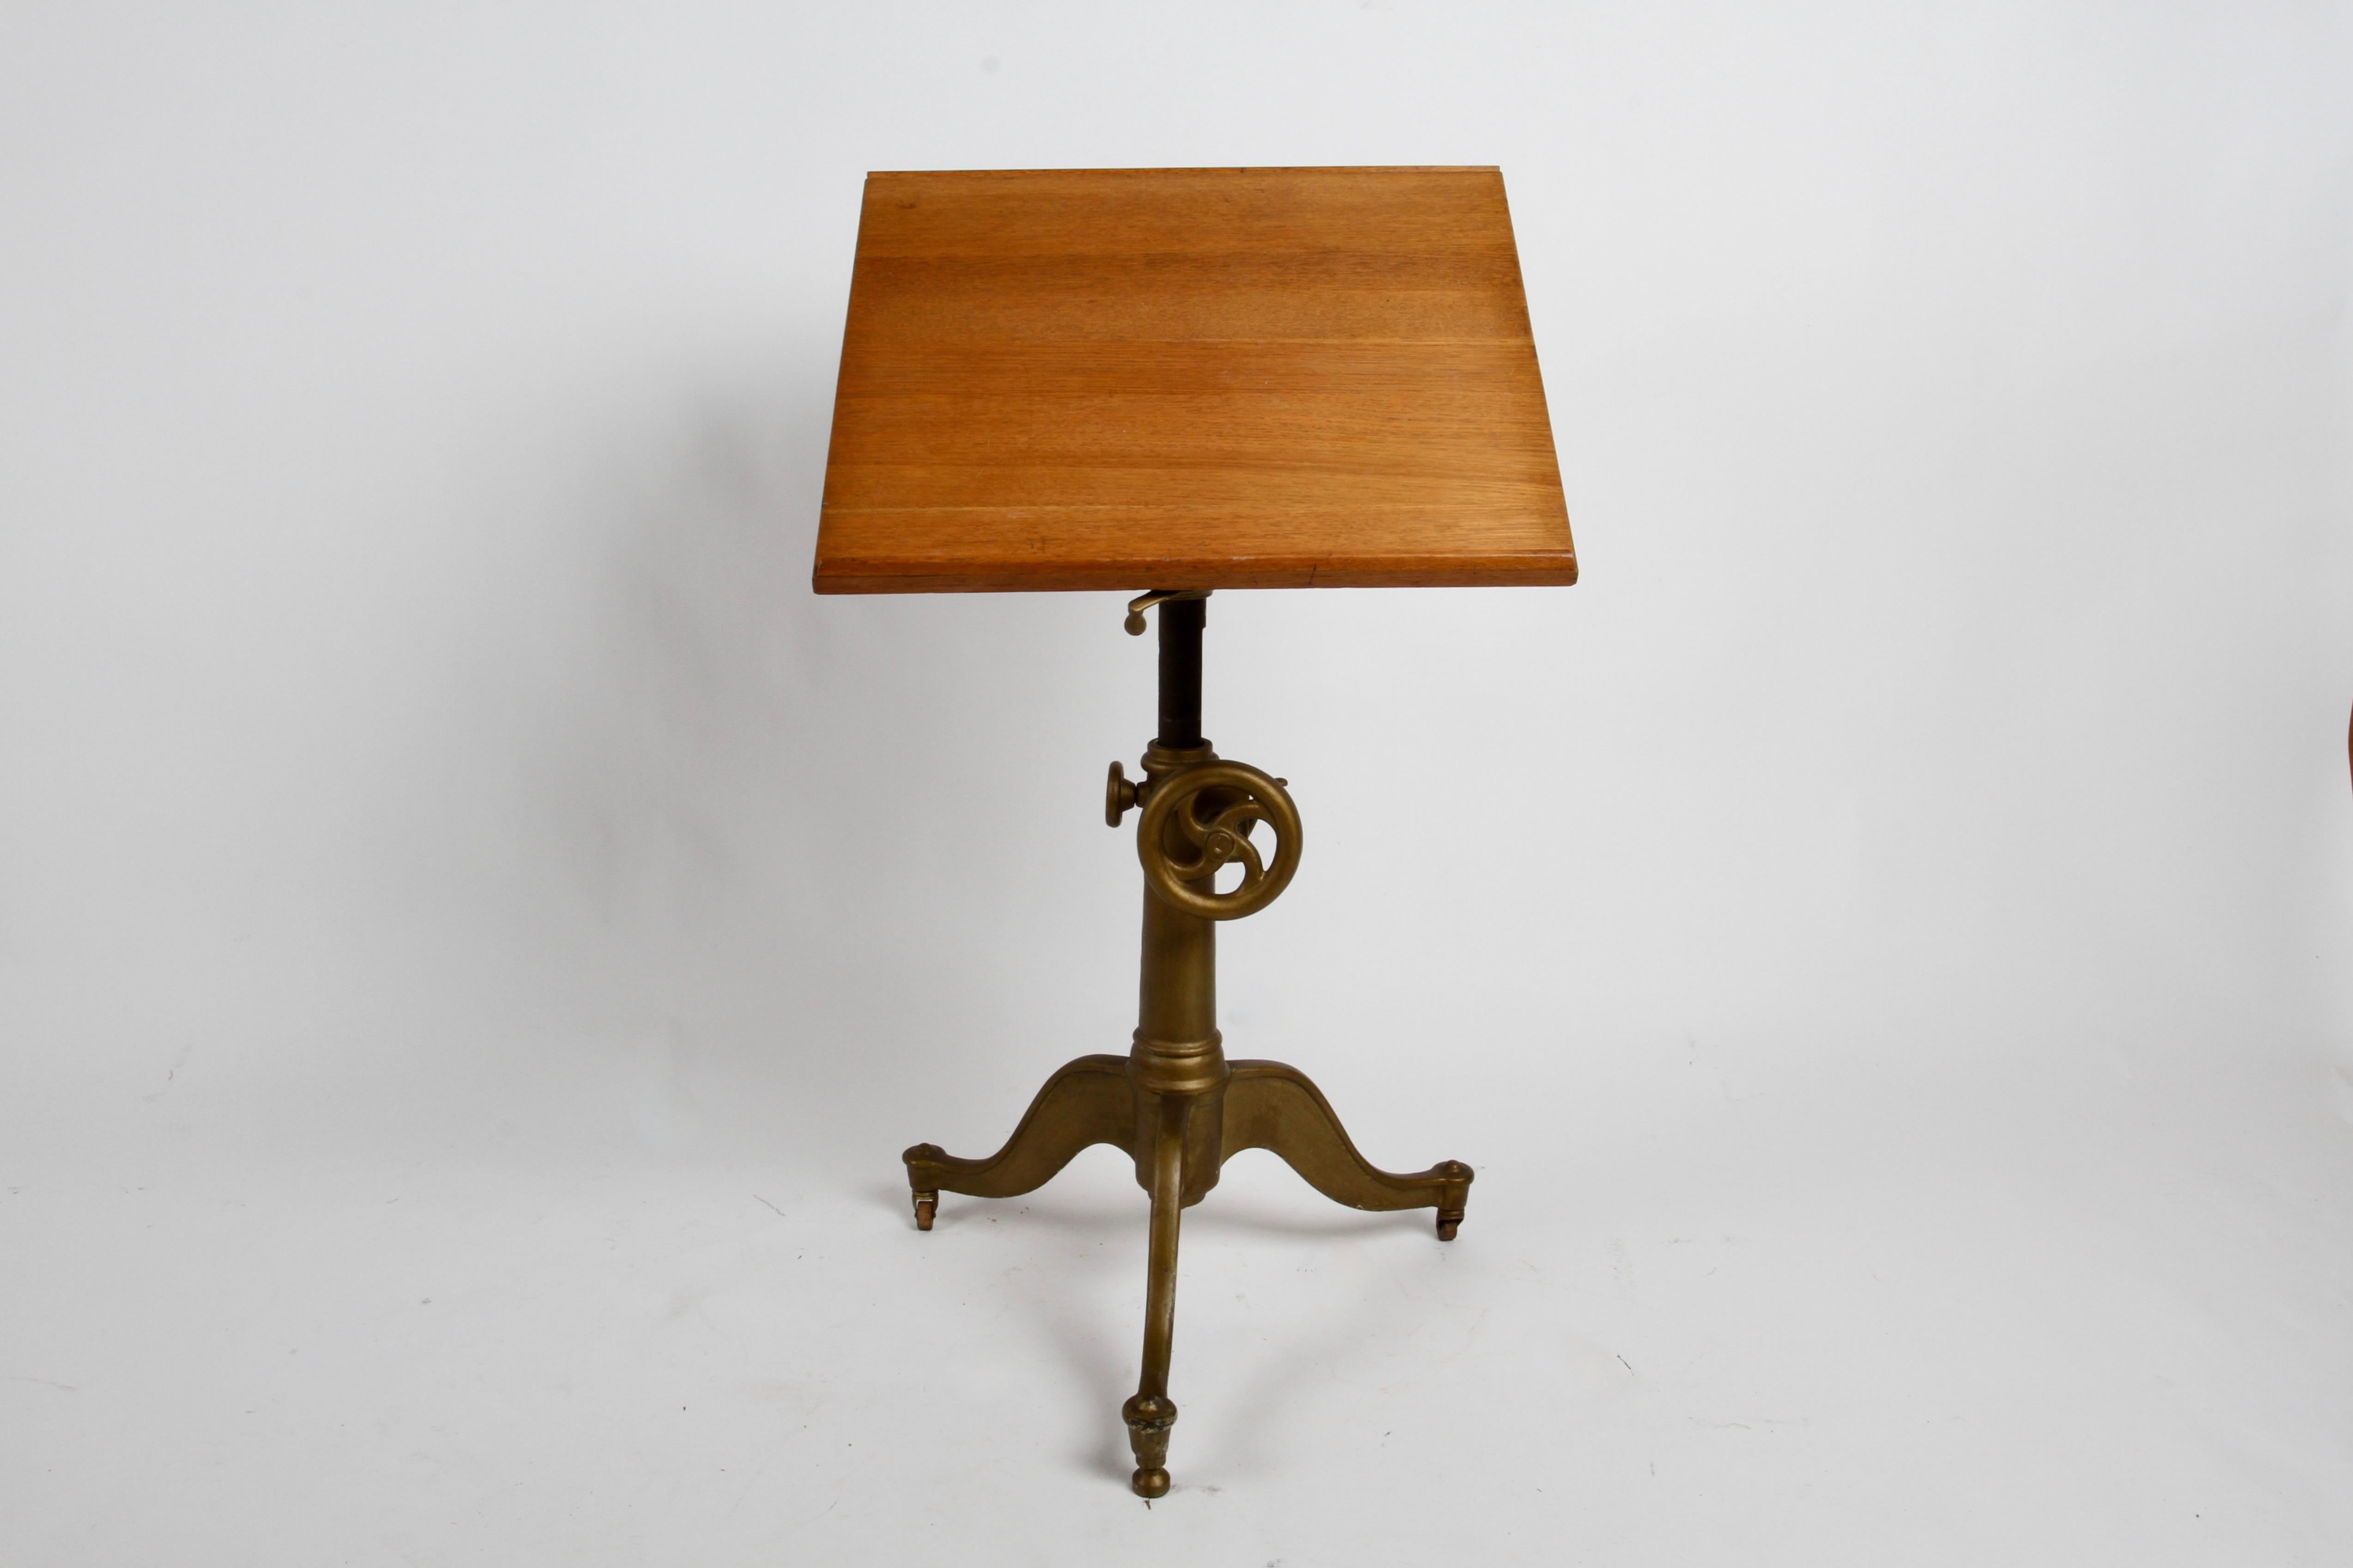 Antique American Industrial age gold painted adjustable tripod cast Iron base drafting table, art easel, lectern - podium or hostess stand with hinged oak top. In the style of Keuffel and Esser or K&E. Industrial knobs allowing for the adjustment of